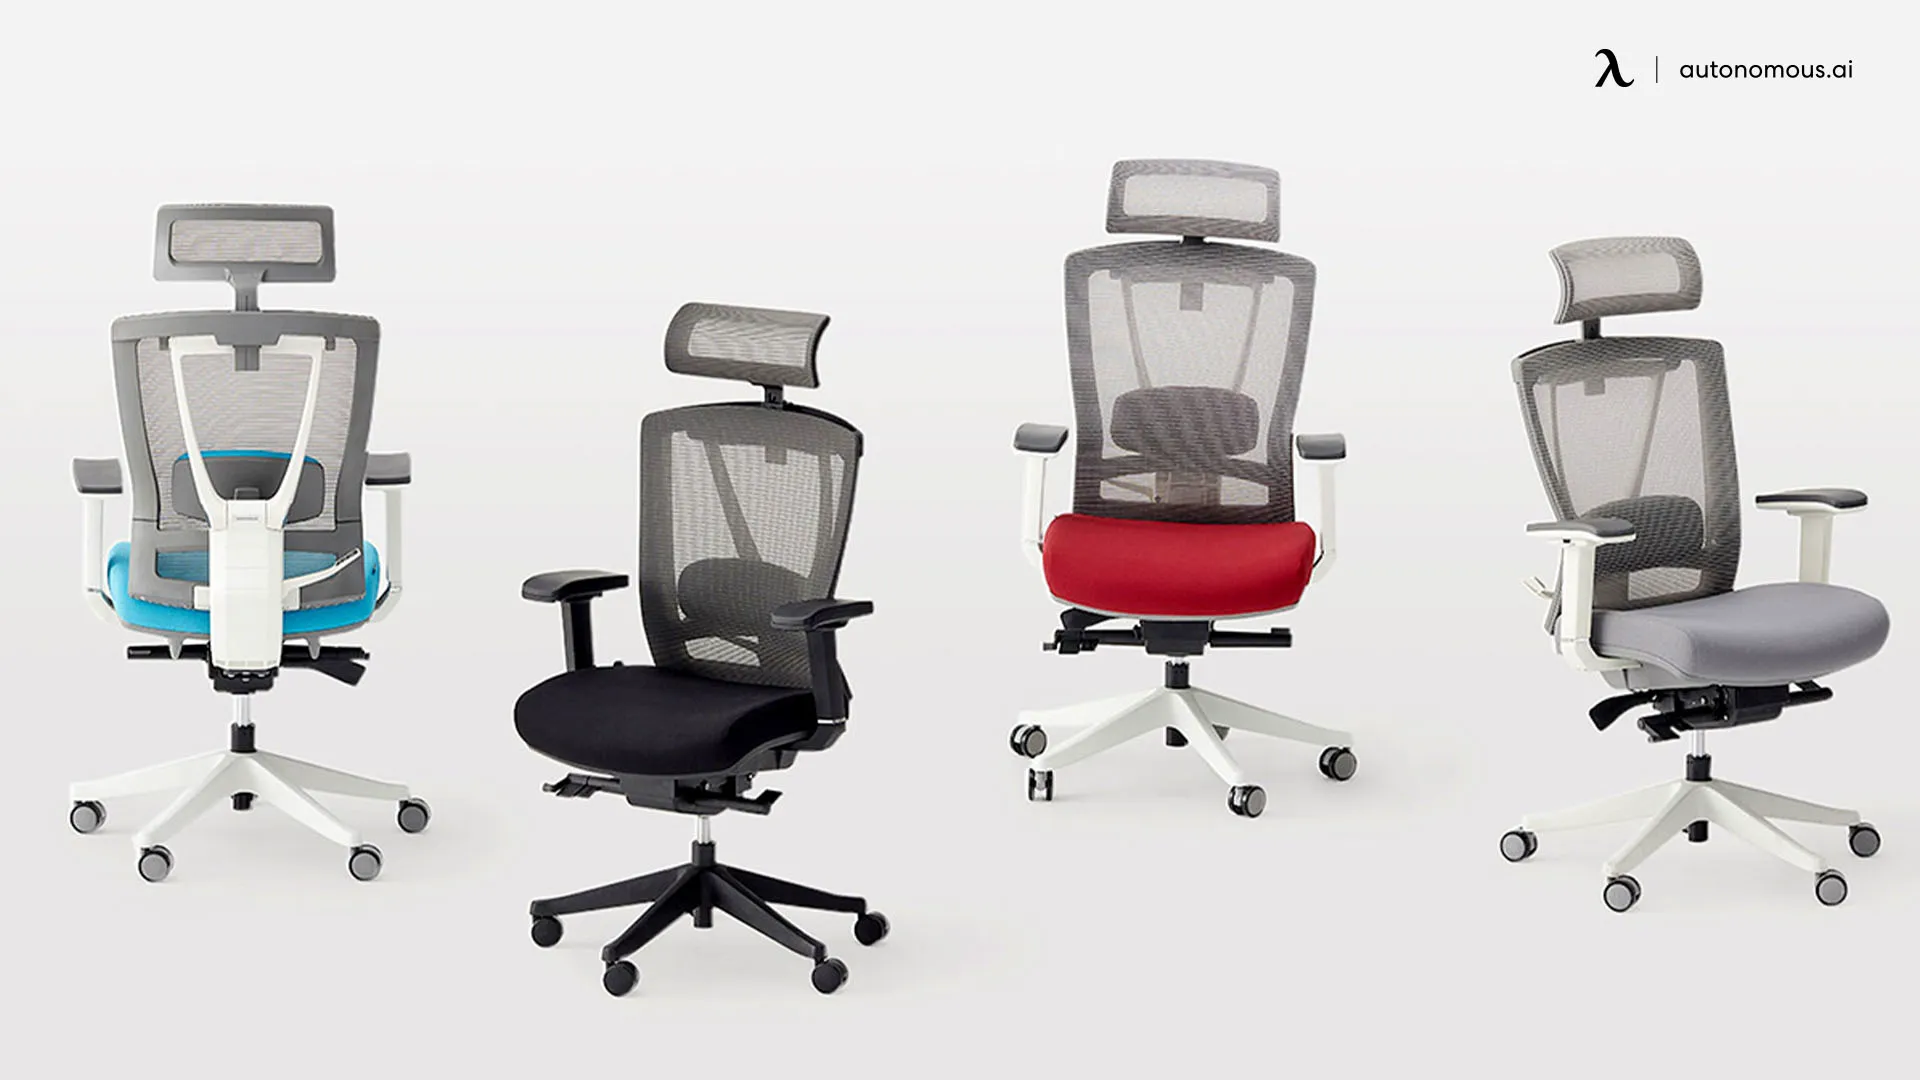 ErgoChair Pro Father’s Day office gifts